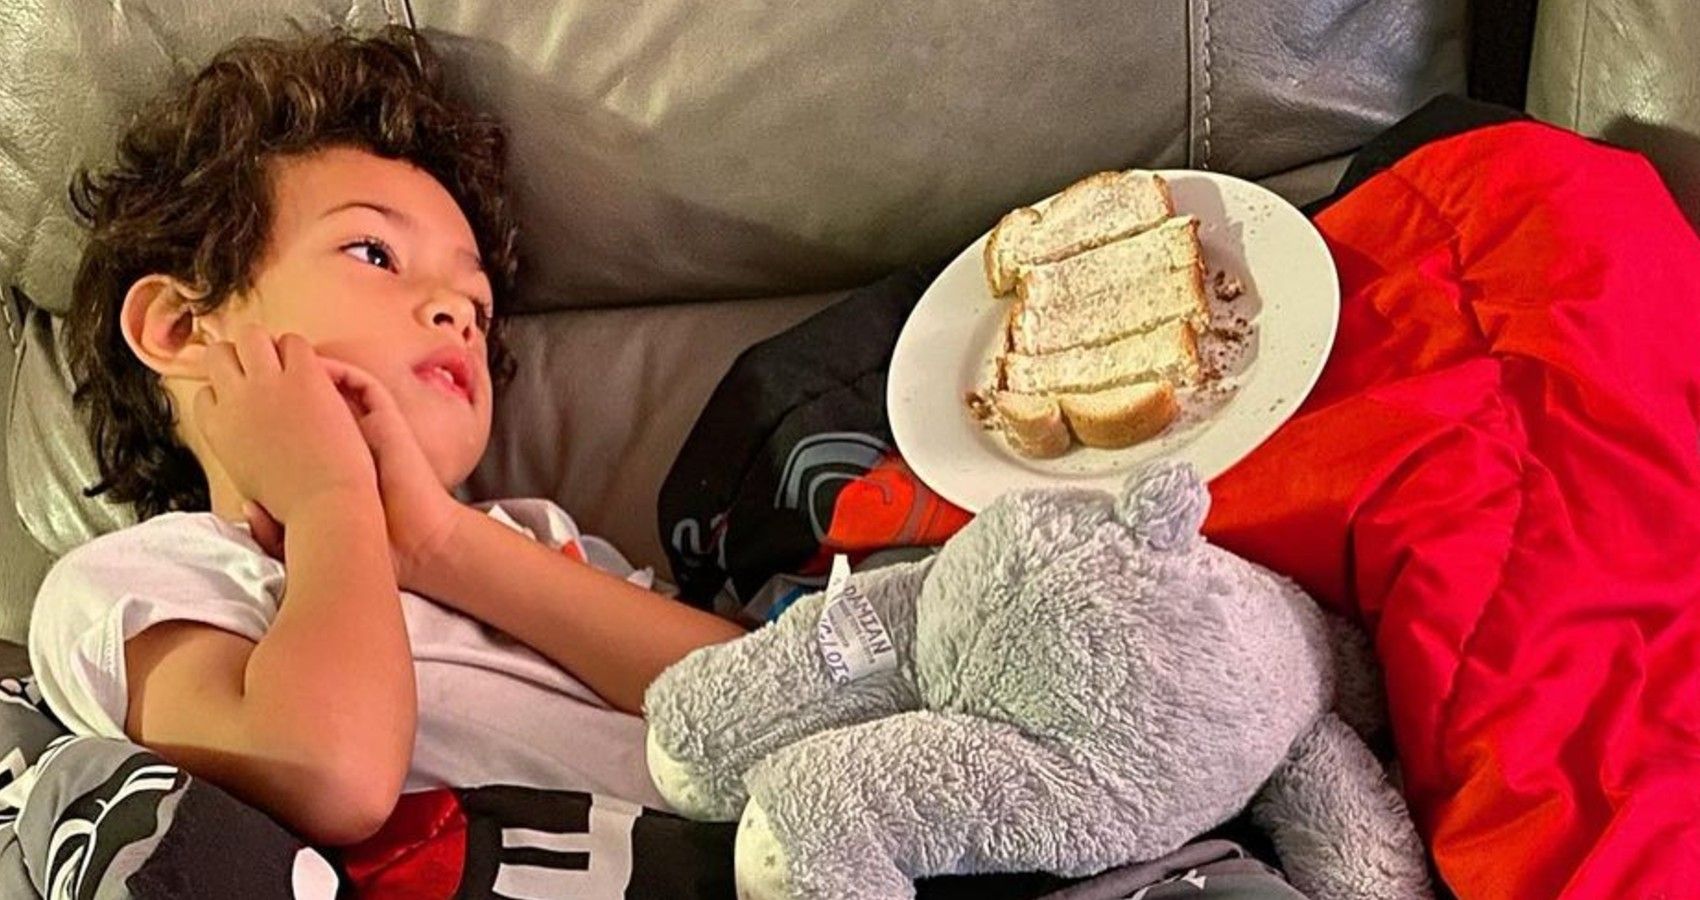 A child laying down on the couch with a plate of food that he is barely eating